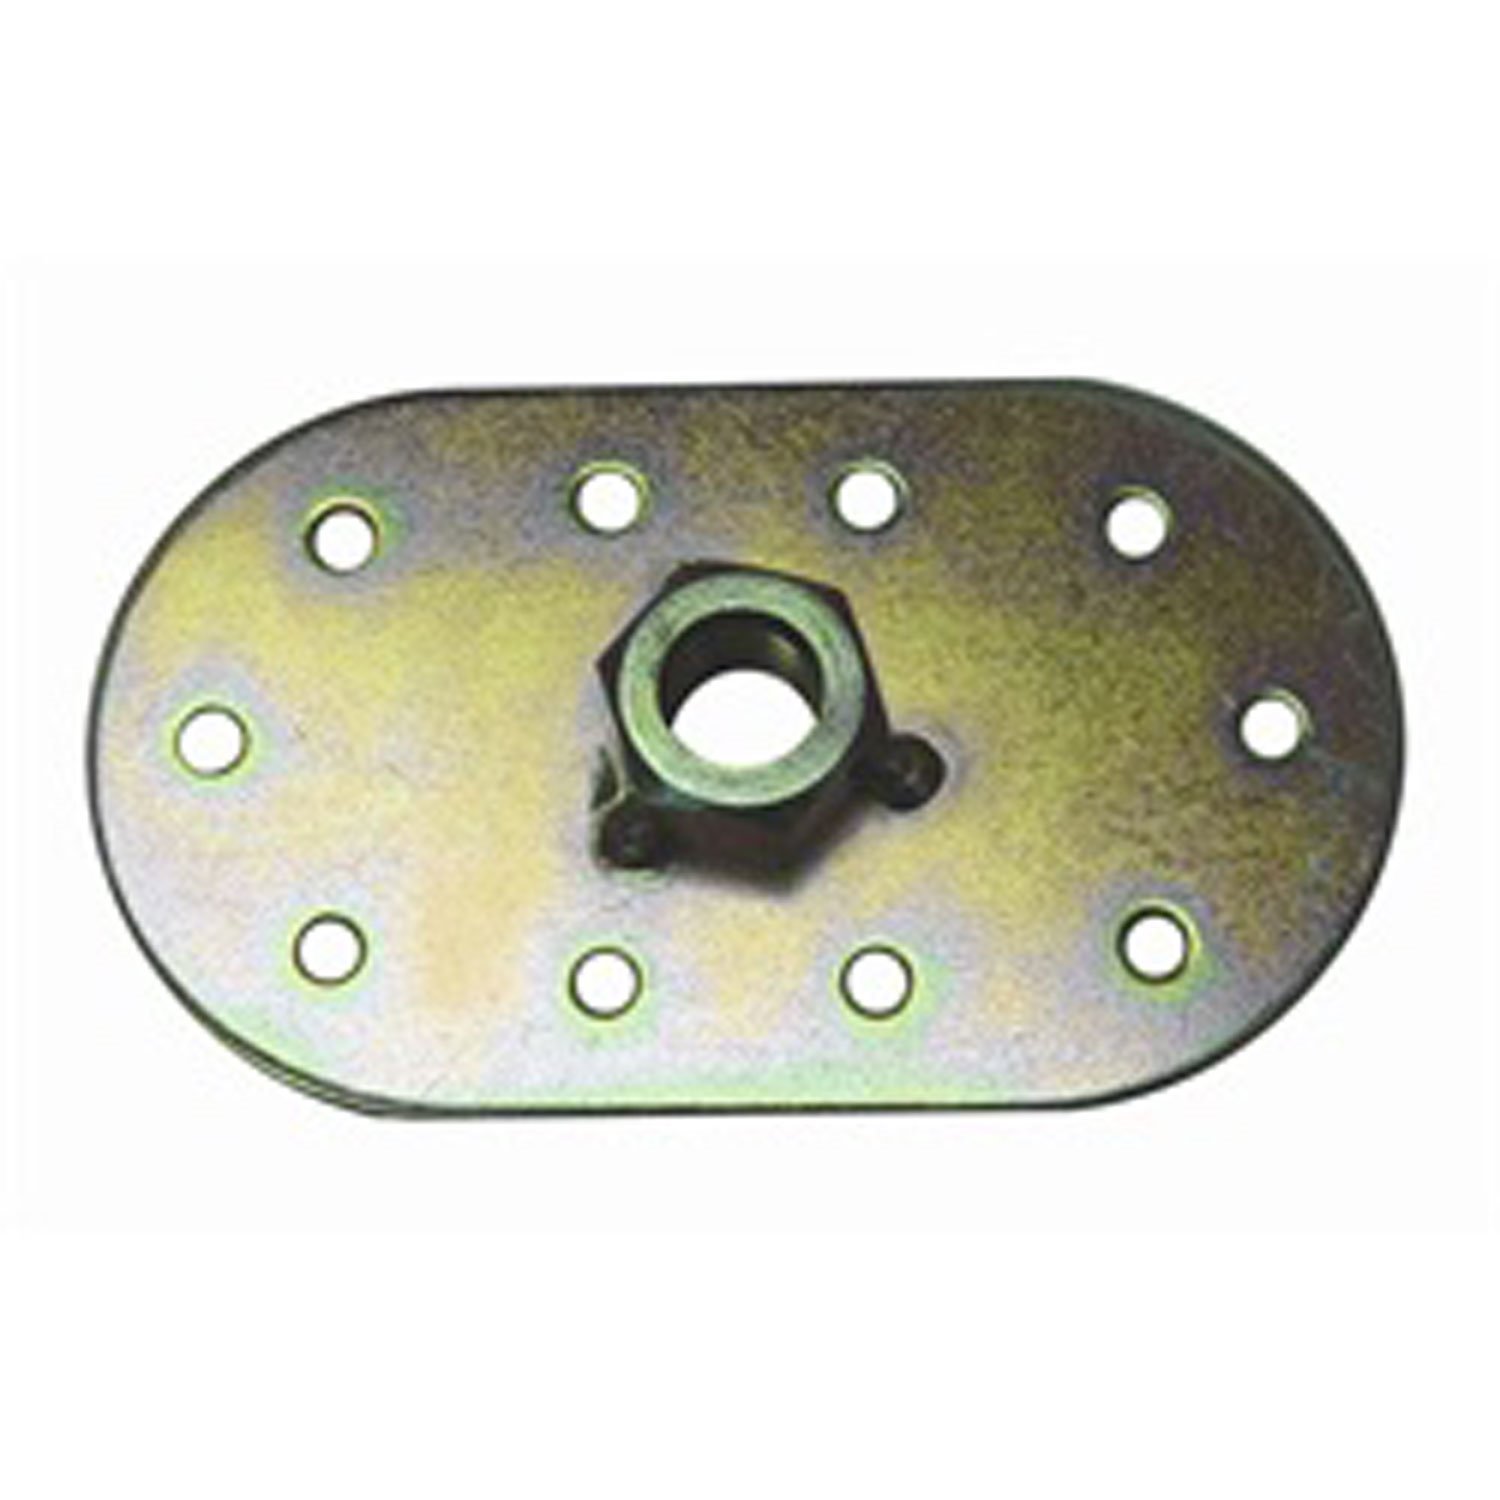 This seat belt mounting oval from Rugged Ridge allows you to floor mount lap belts. 1/2 inch x 20 thread bolt hole.